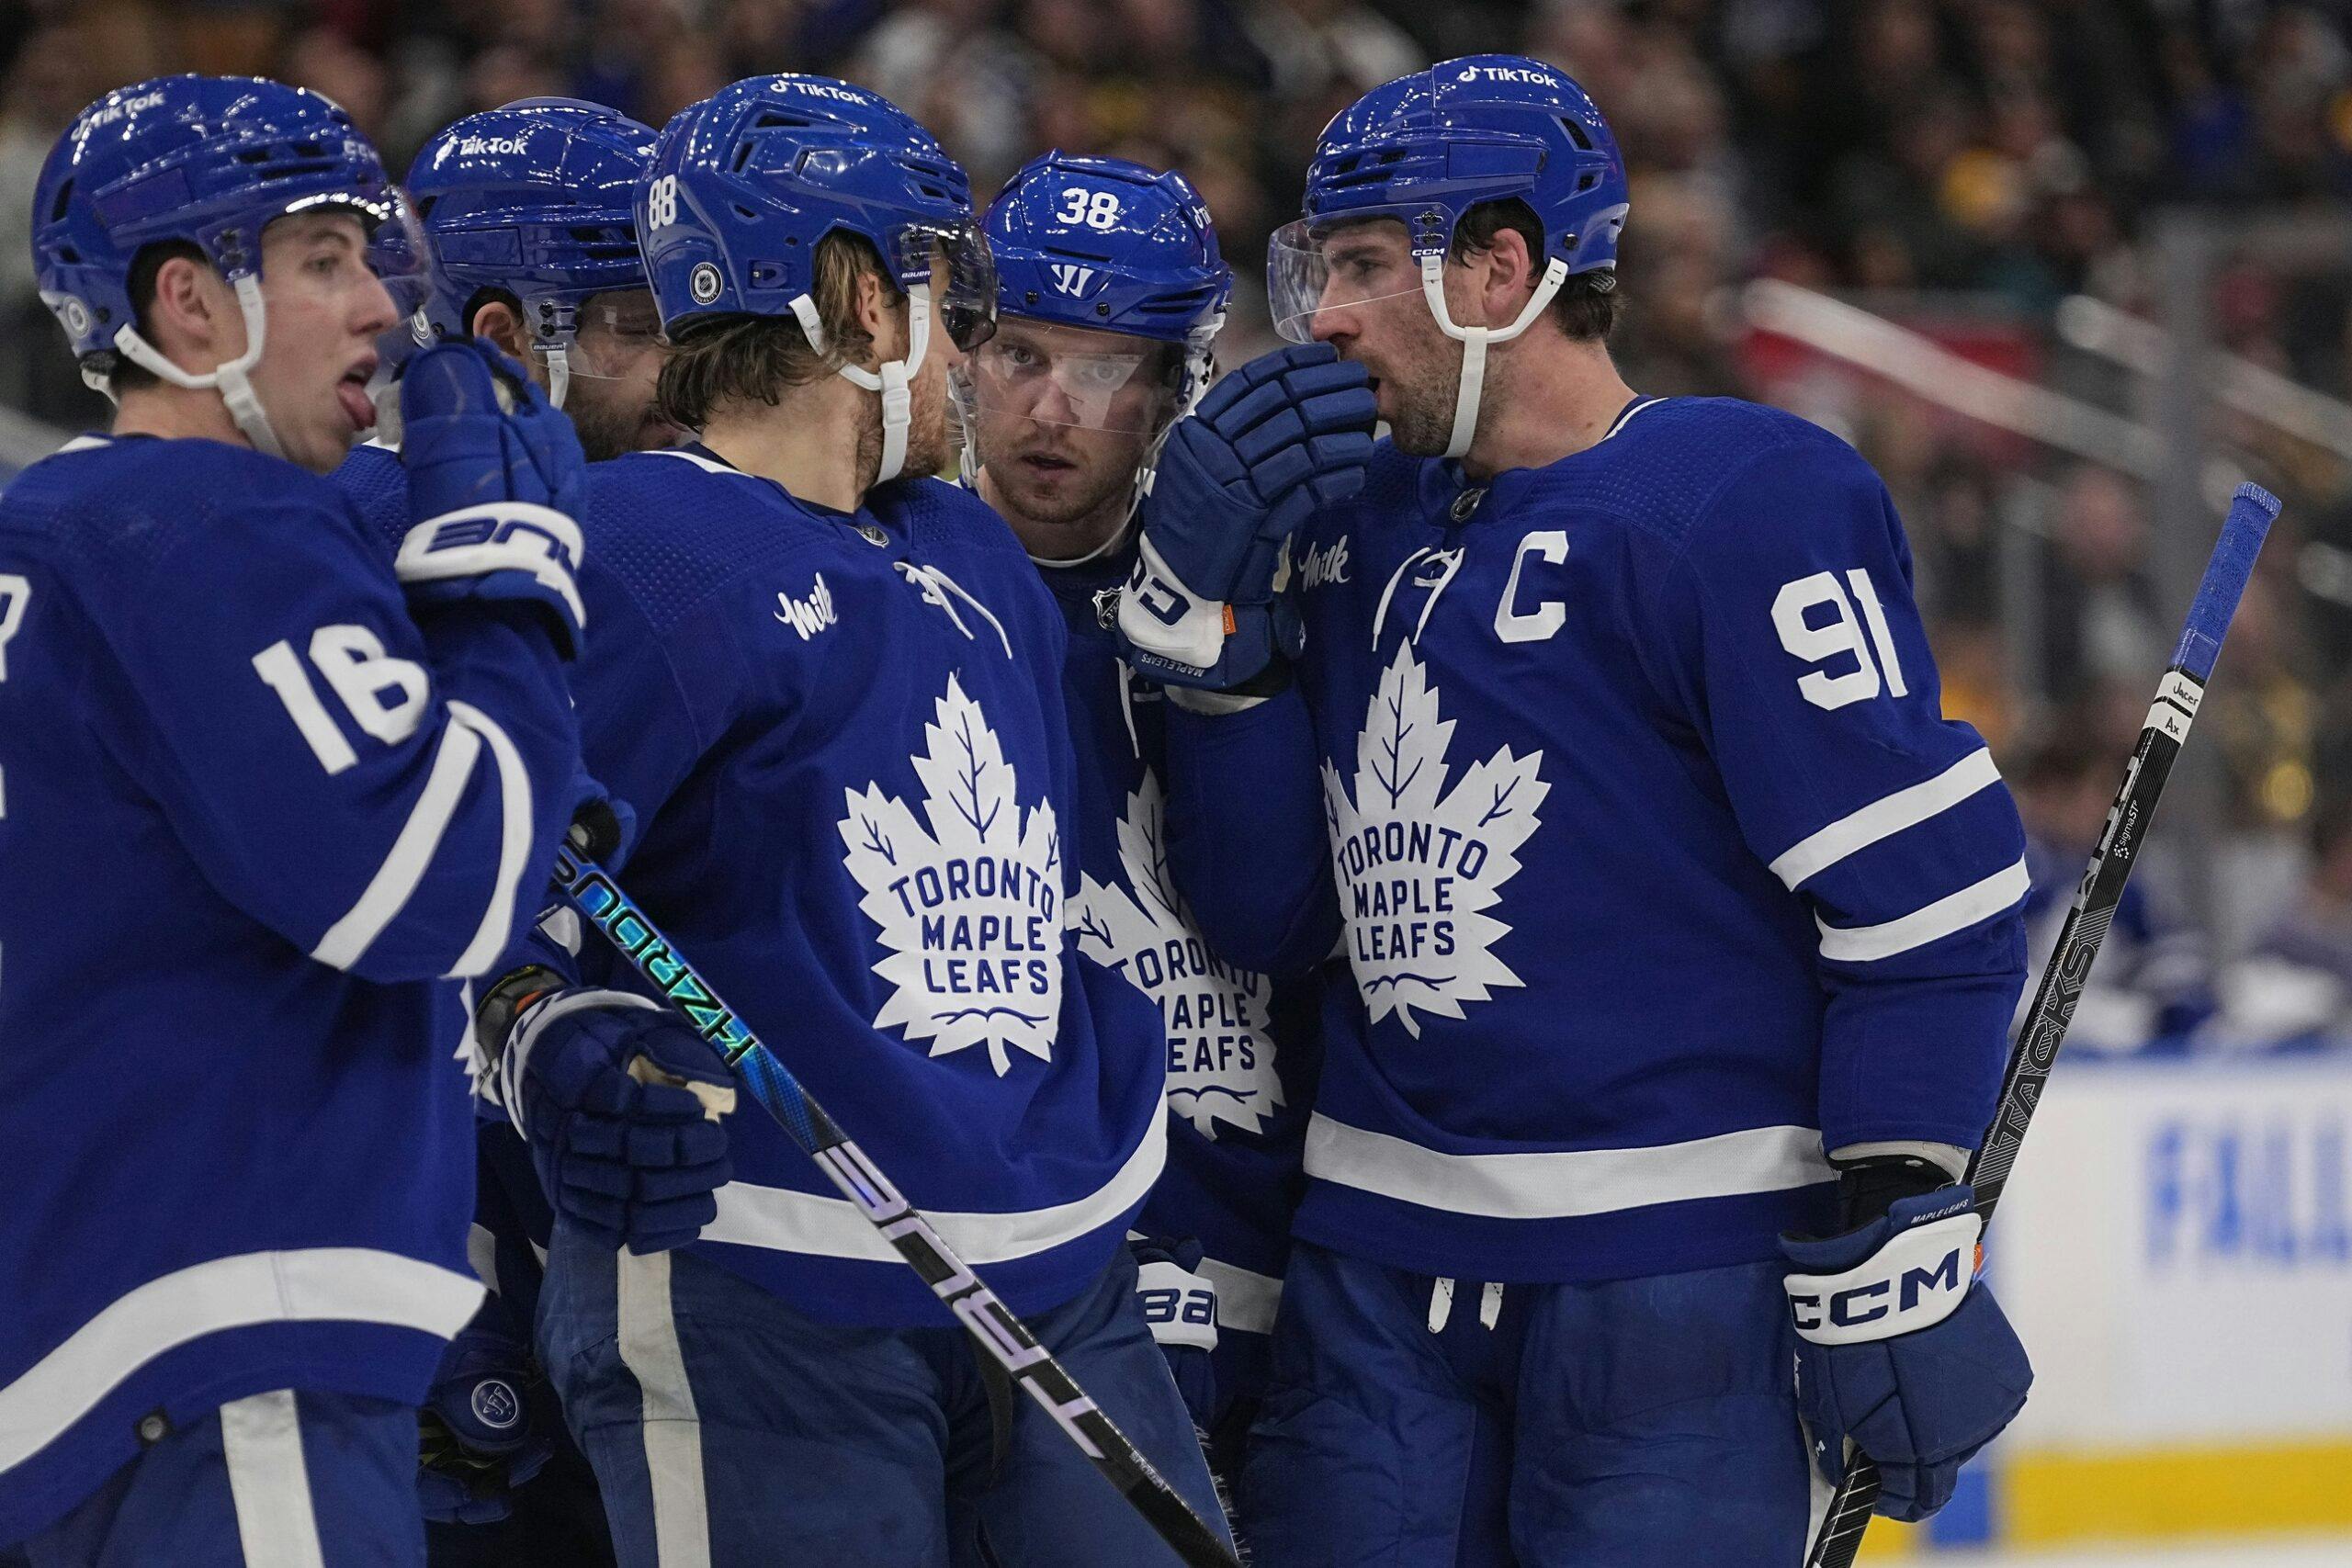 Which players who have played for both Toronto Maple Leafs and New